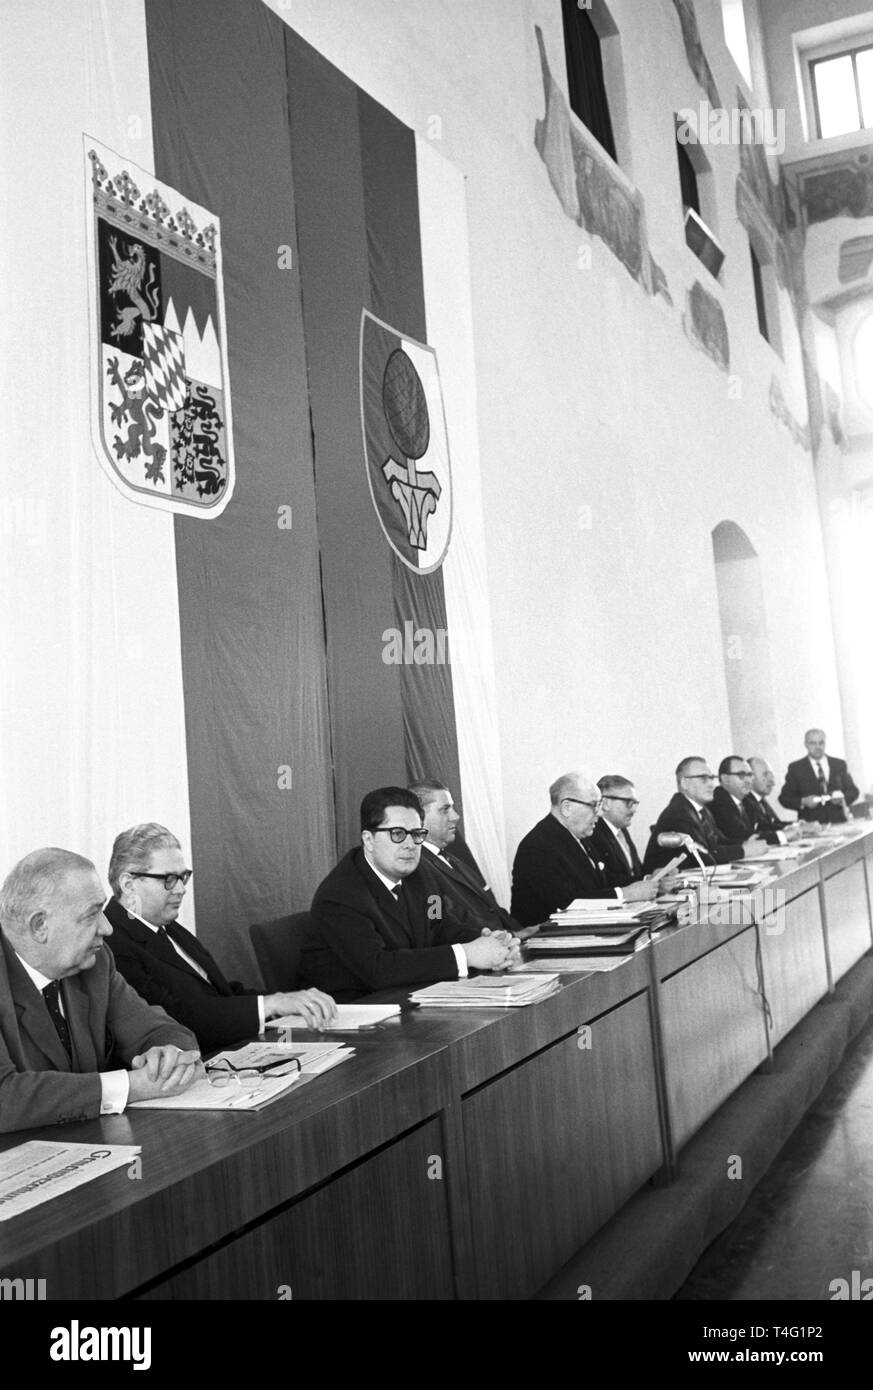 The Bavarian Associaton of Cities in Augsburg holds a plenary assembly on the 17th of January in 1963. The picture shows the chairmen (l-r) Albin Lang (mayor of Landshut), Helmuth Zimmerer (mayor of Würzburg), Hans-Jochen Vogel (mayor of München), Andreas Urschlechter (mayor of Nürnberg), Klaus Müller (mayor of Augsburg), chief municipal director Heinz Jobst, Leonhard Holzberger (mayor of Marktredwitz), Theodor Matthieu (mayor of Bamberg), Wolfgang Steininger (mayor of Amberg) und Egid Trost (mayor of Brückenau). | usage worldwide Stock Photo